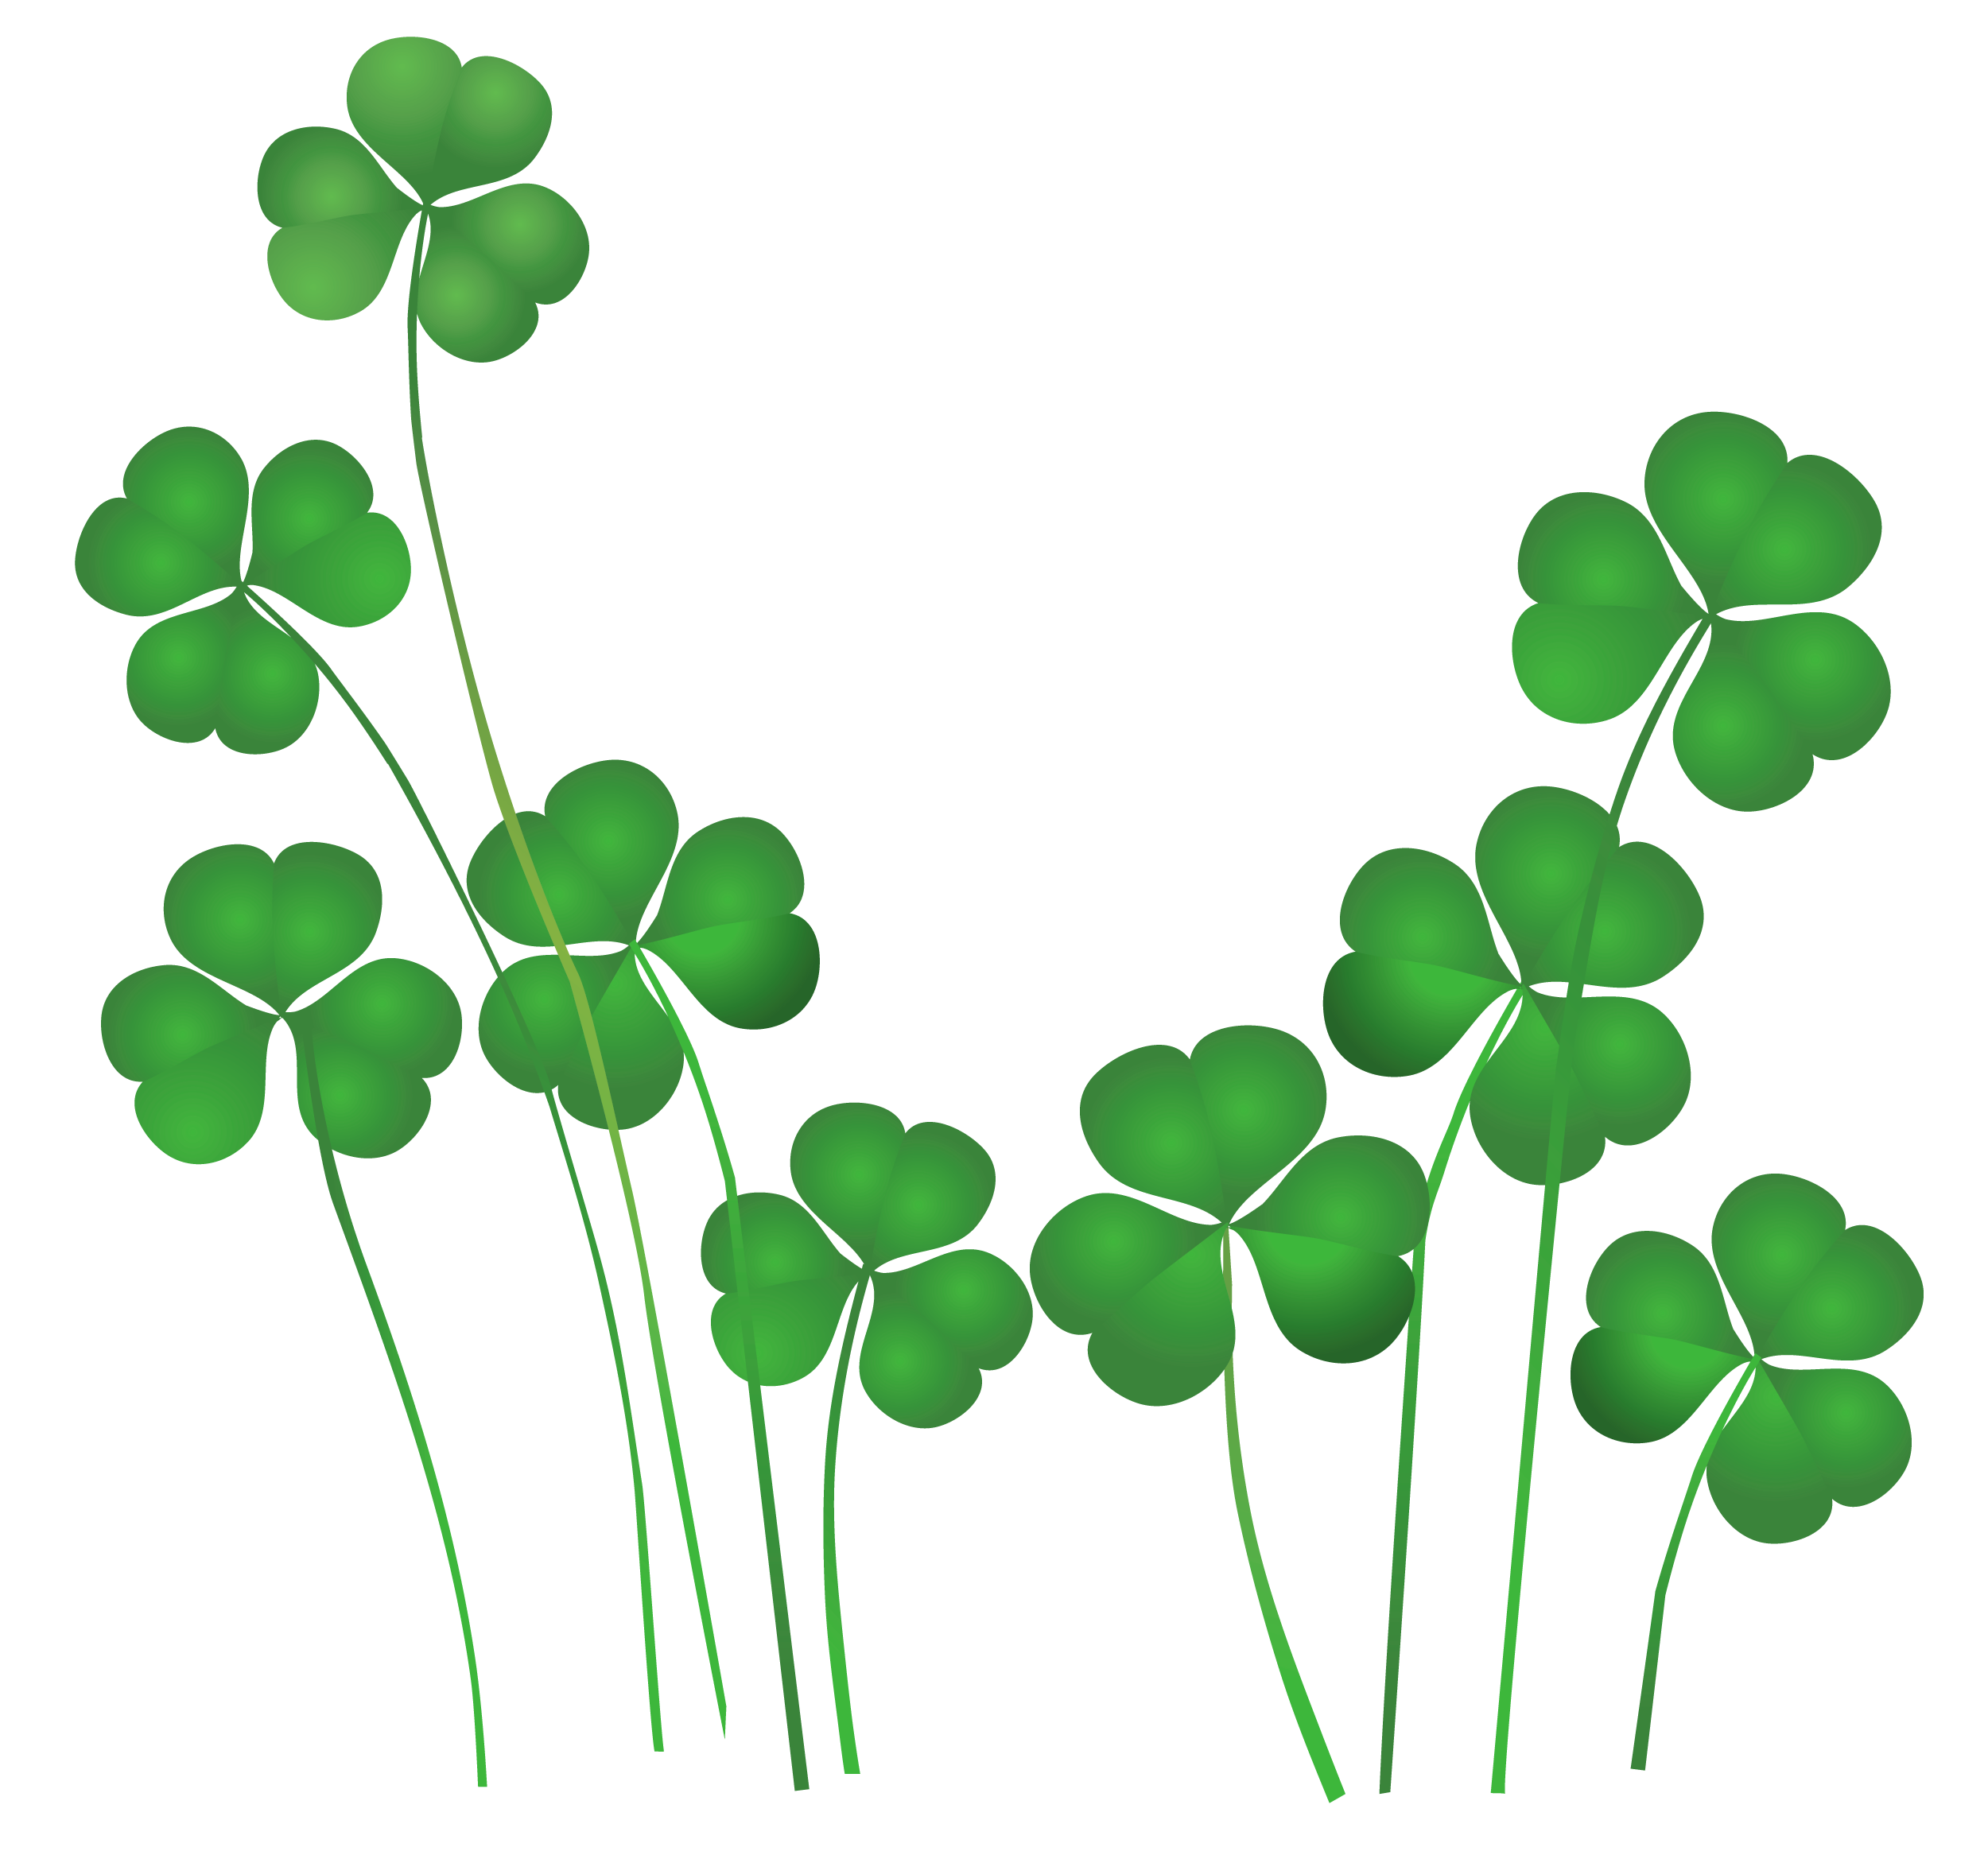  collection of march. Clipart frame st patricks day